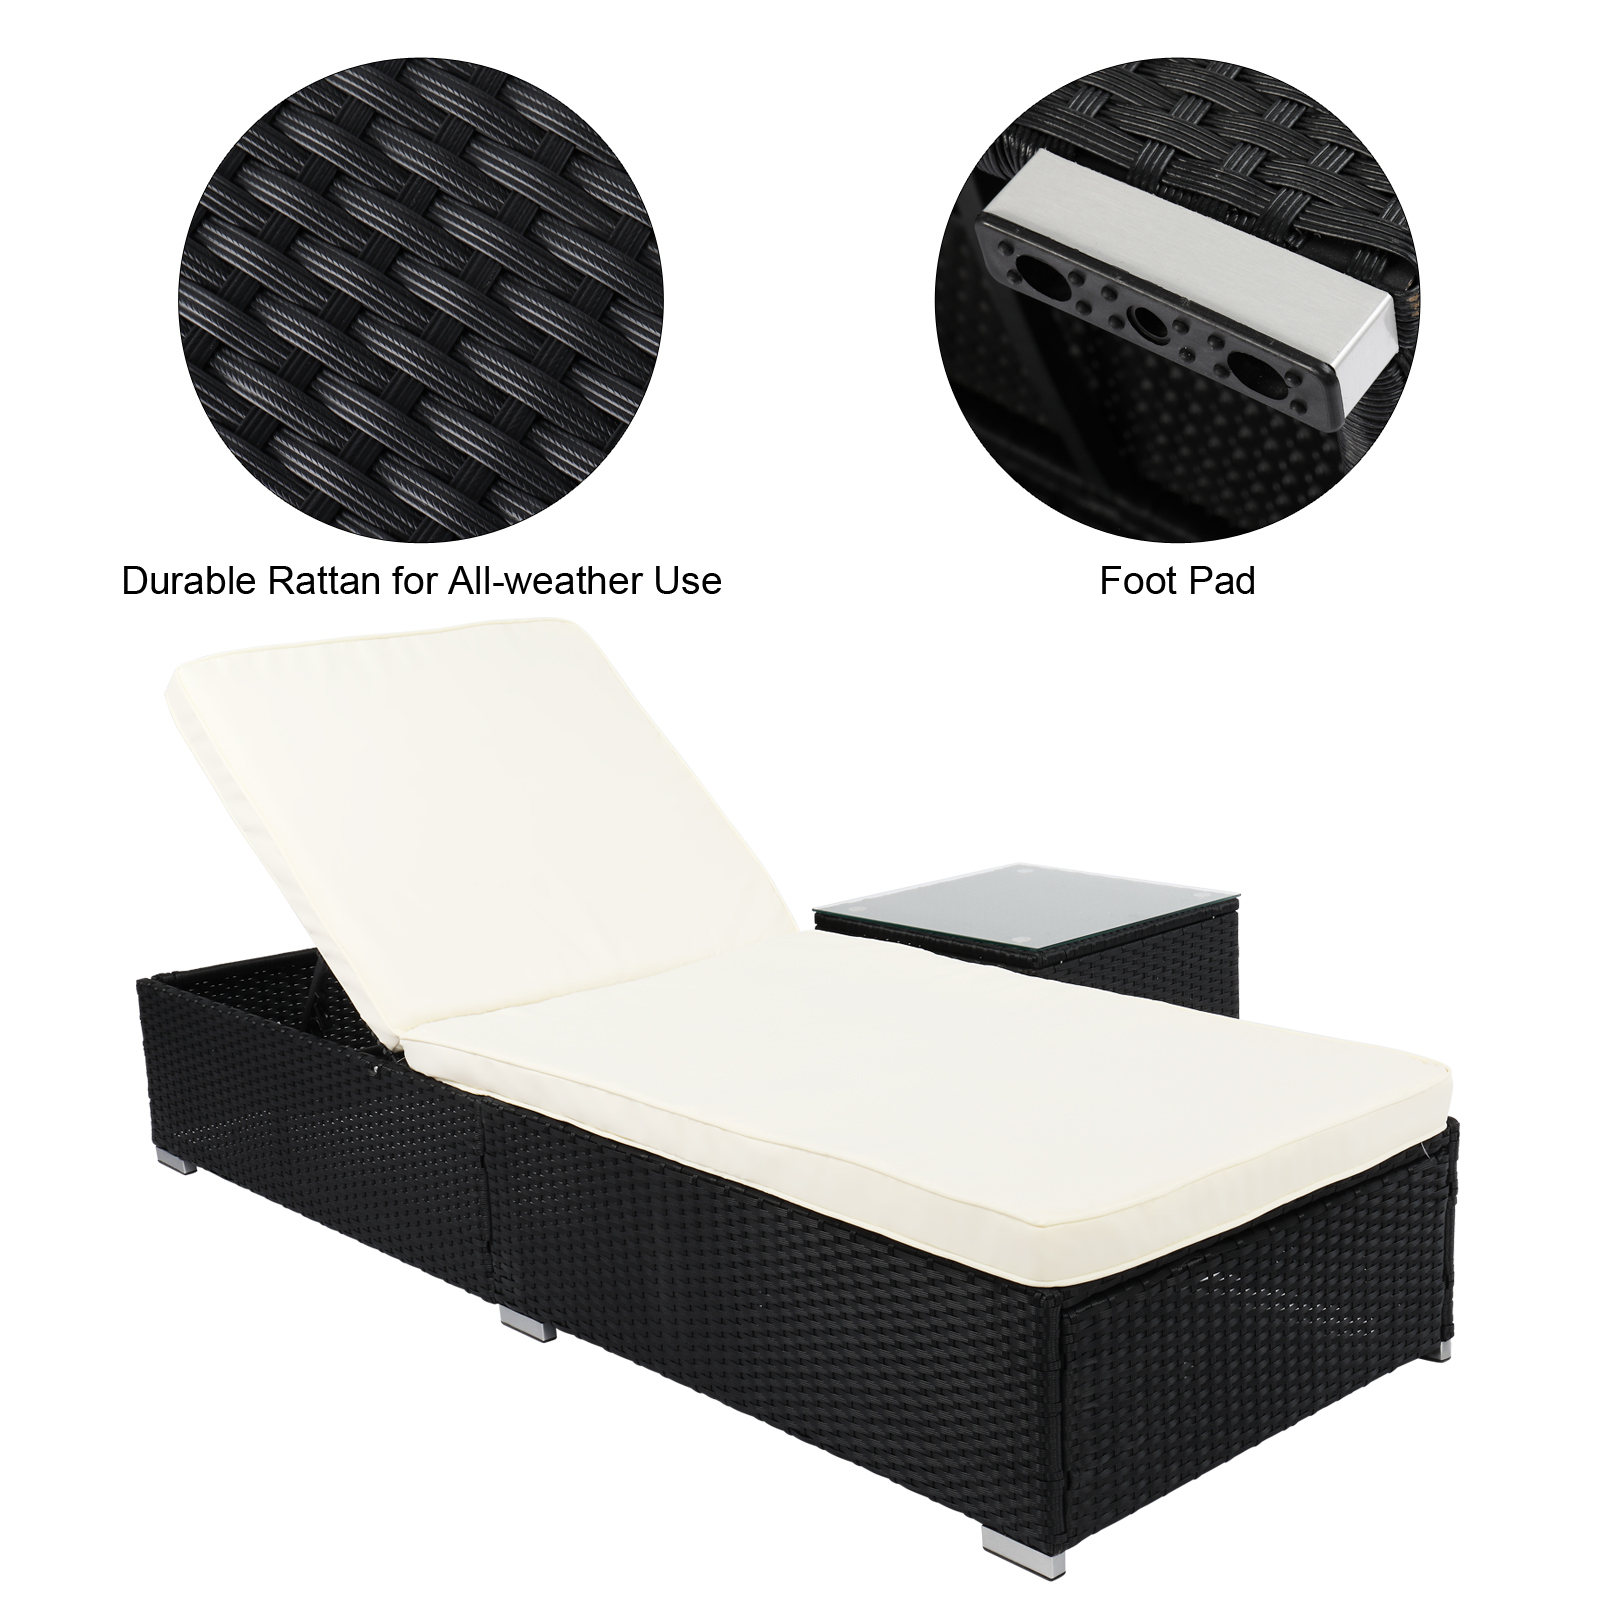 GZXS Rattan Wicker Furniture Set of 2, Outdoor Patio Pool Lounge Chair + Glass-Top Coffee Table, Patio Outdoor Chaise Lounge Chair for Outside, Black - image 4 of 10